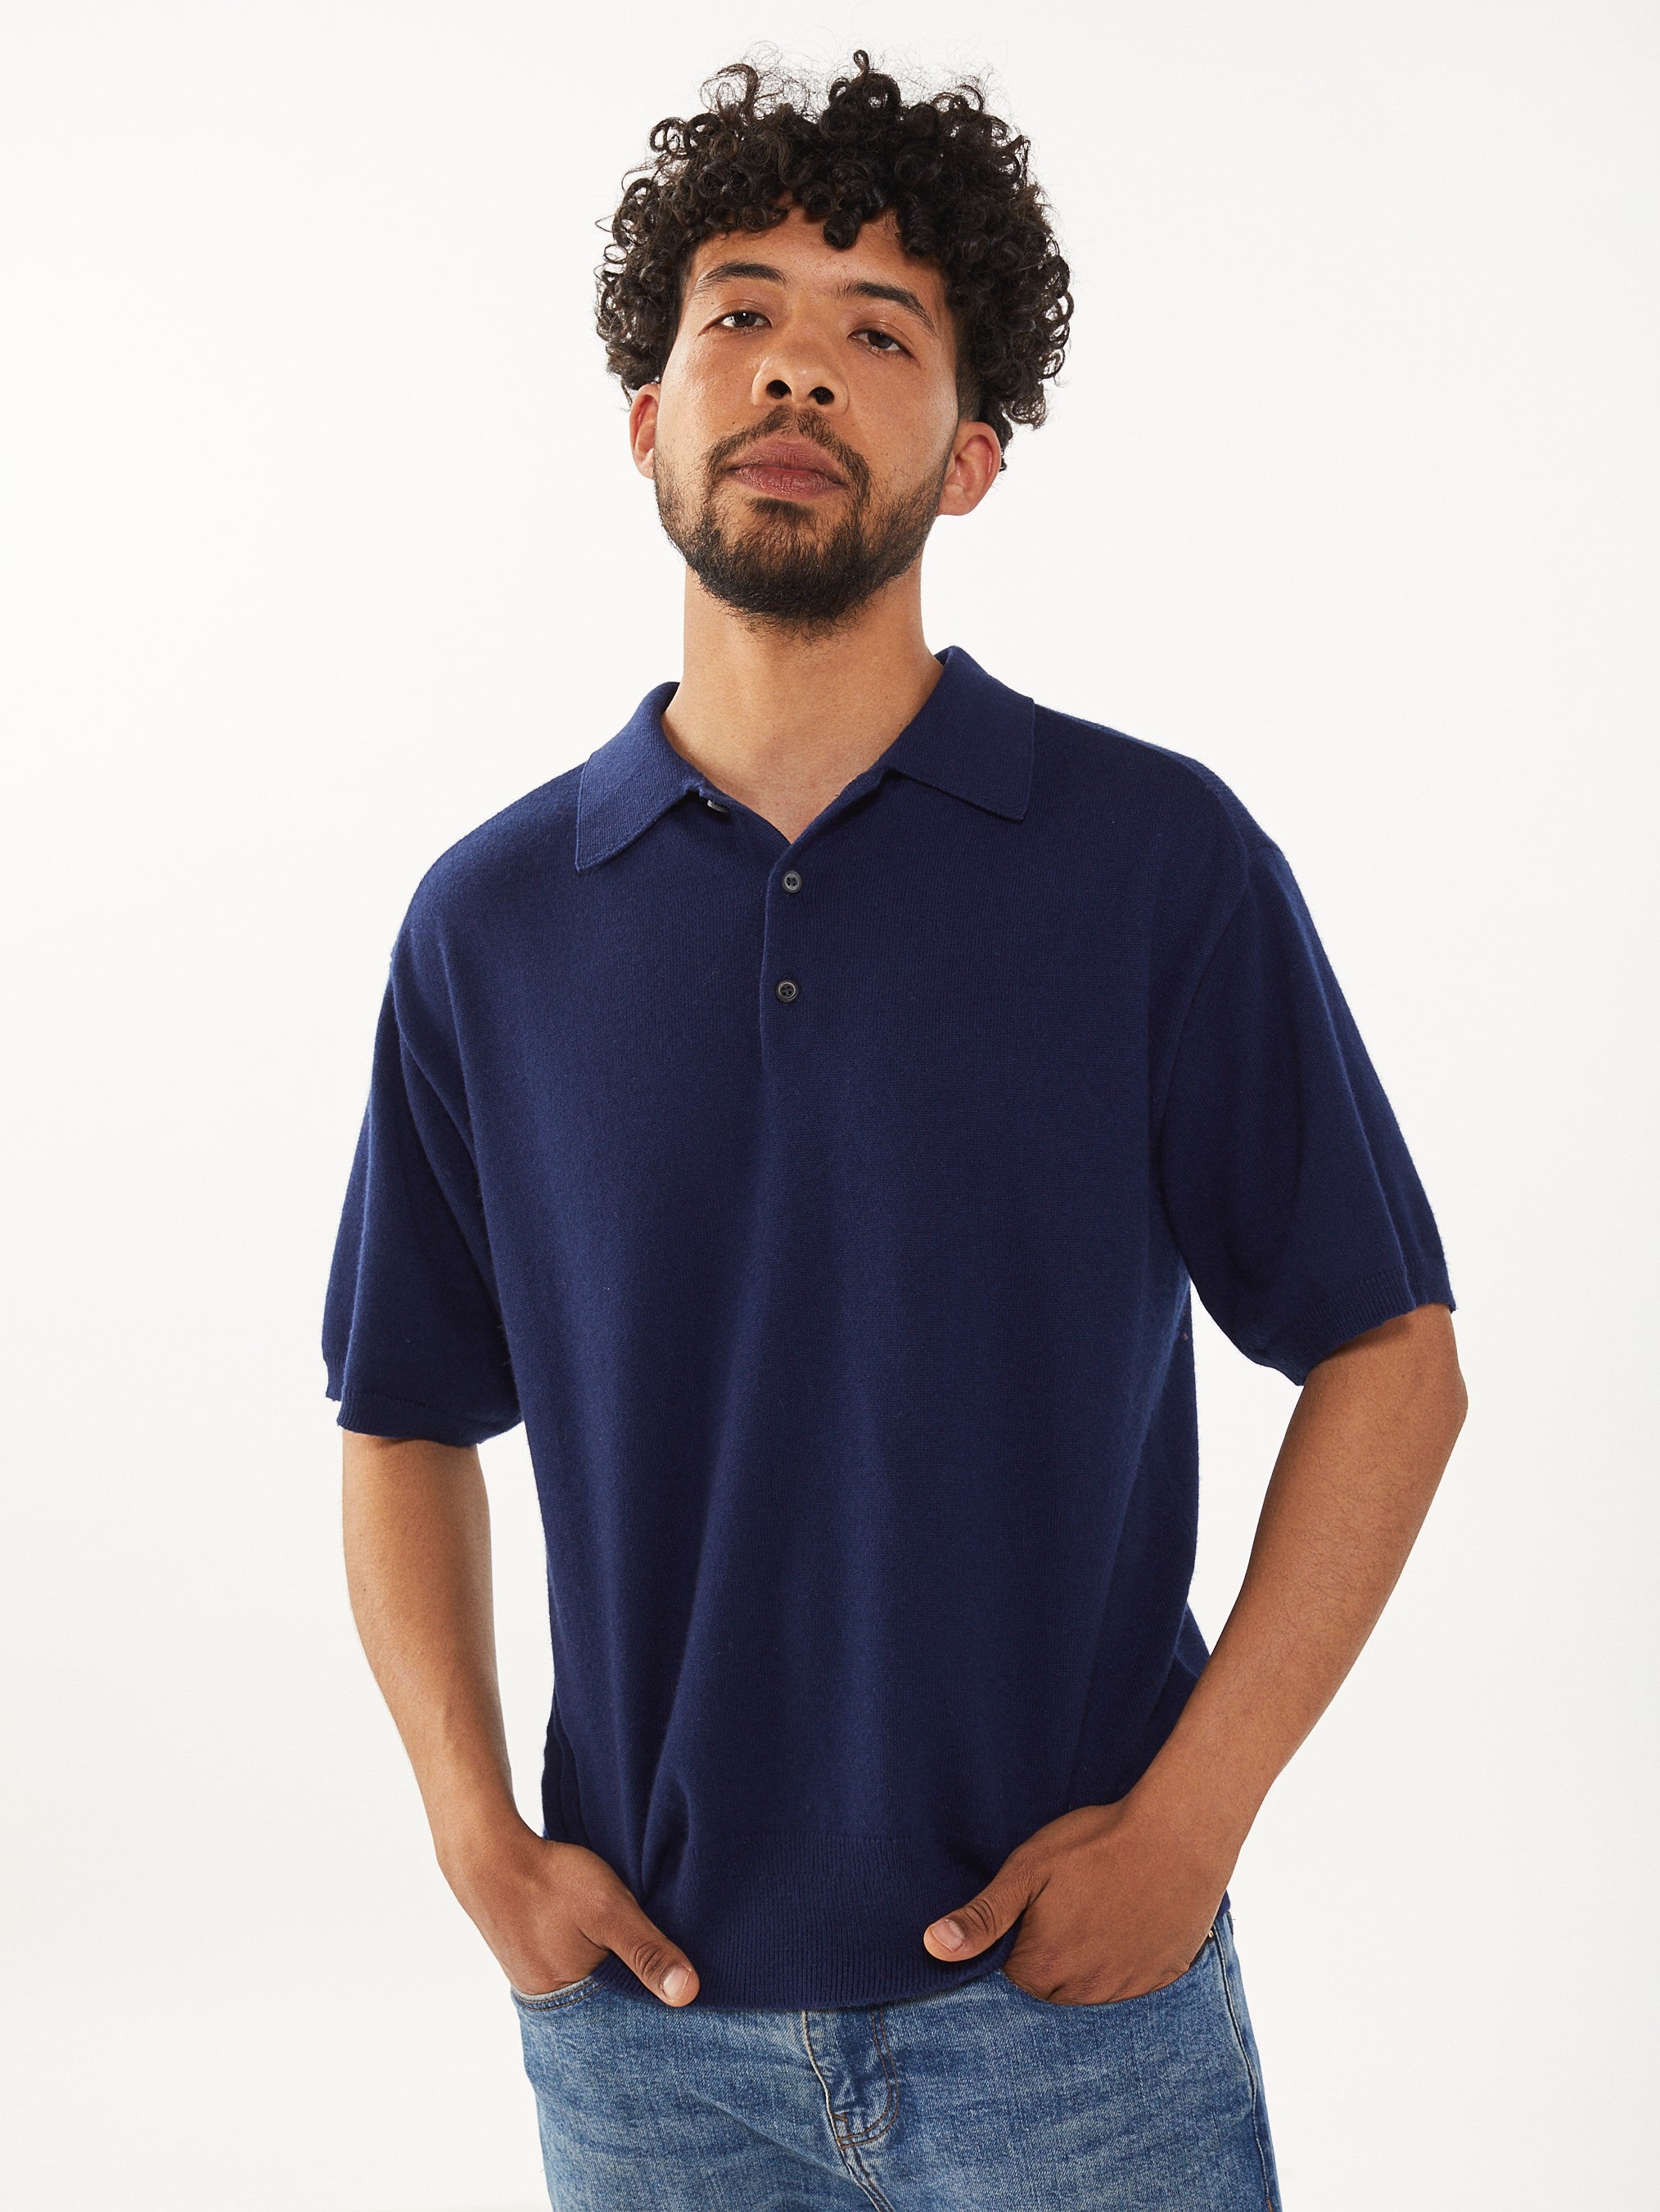 Men's Polo shirt in recycled Cashmere and cotton Navy